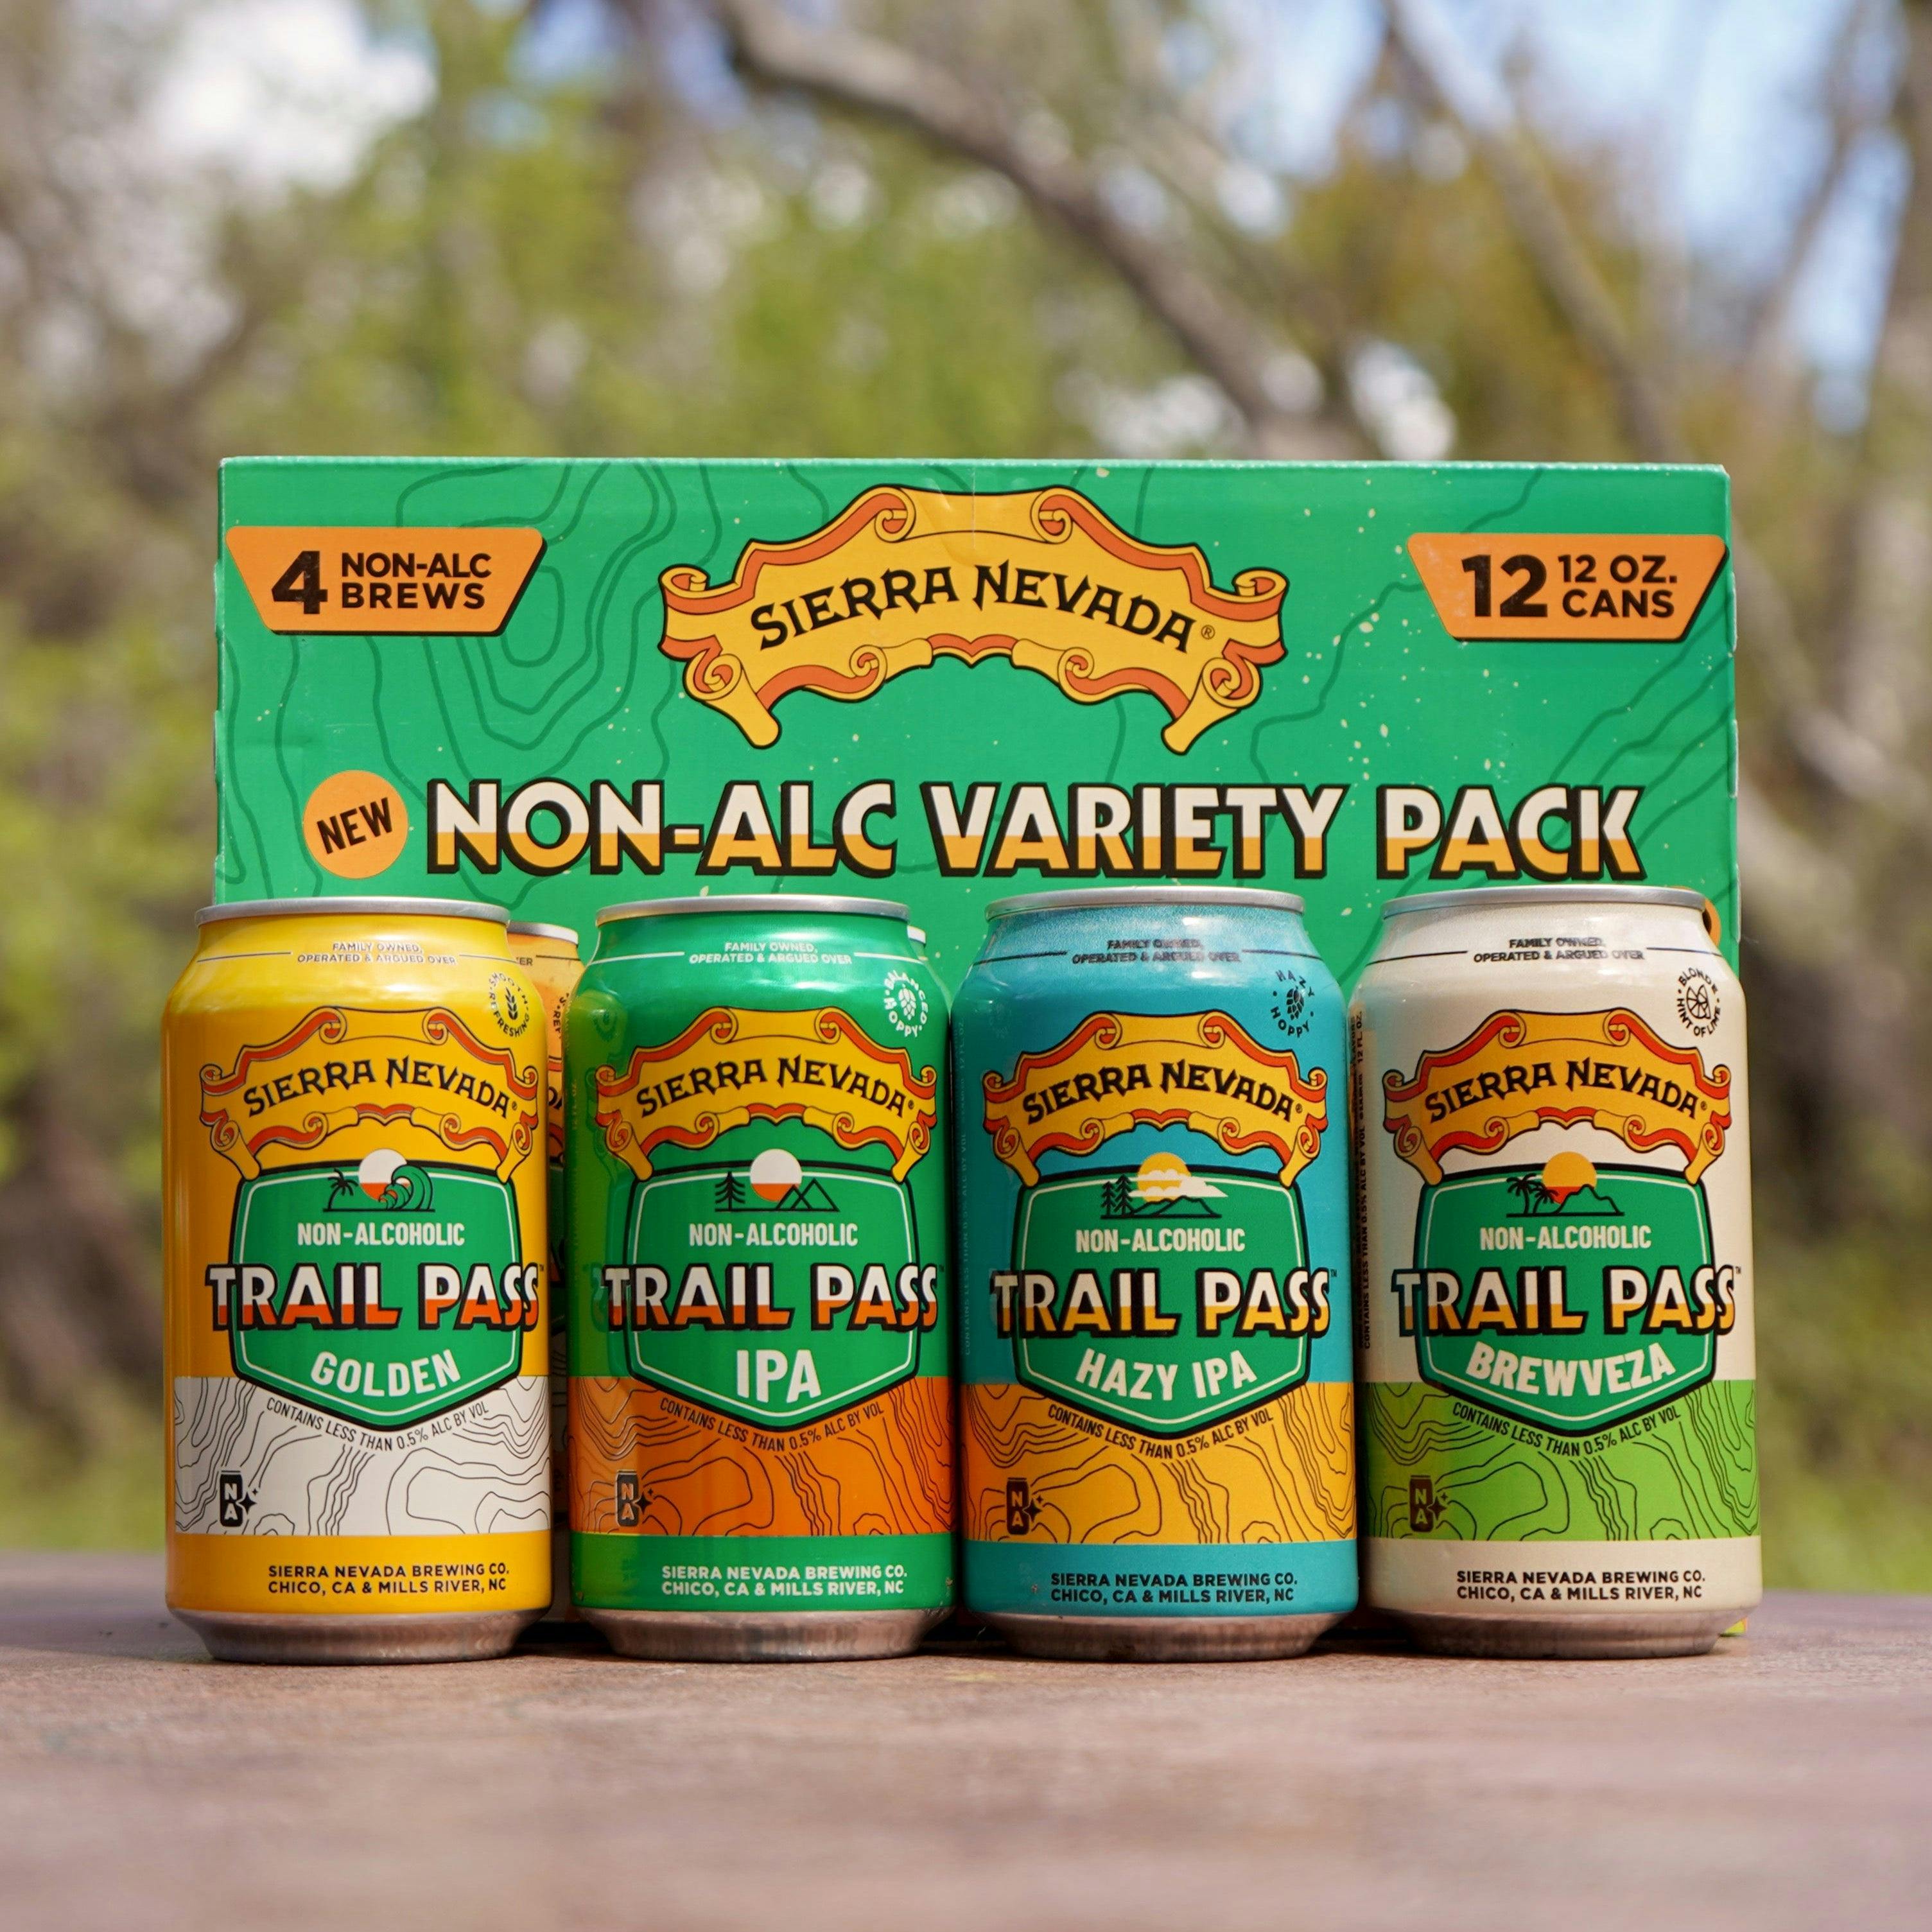 Sierra Nevada Brewing Co. Trail Pass Variety Pack with individual cans lined up in front of the package